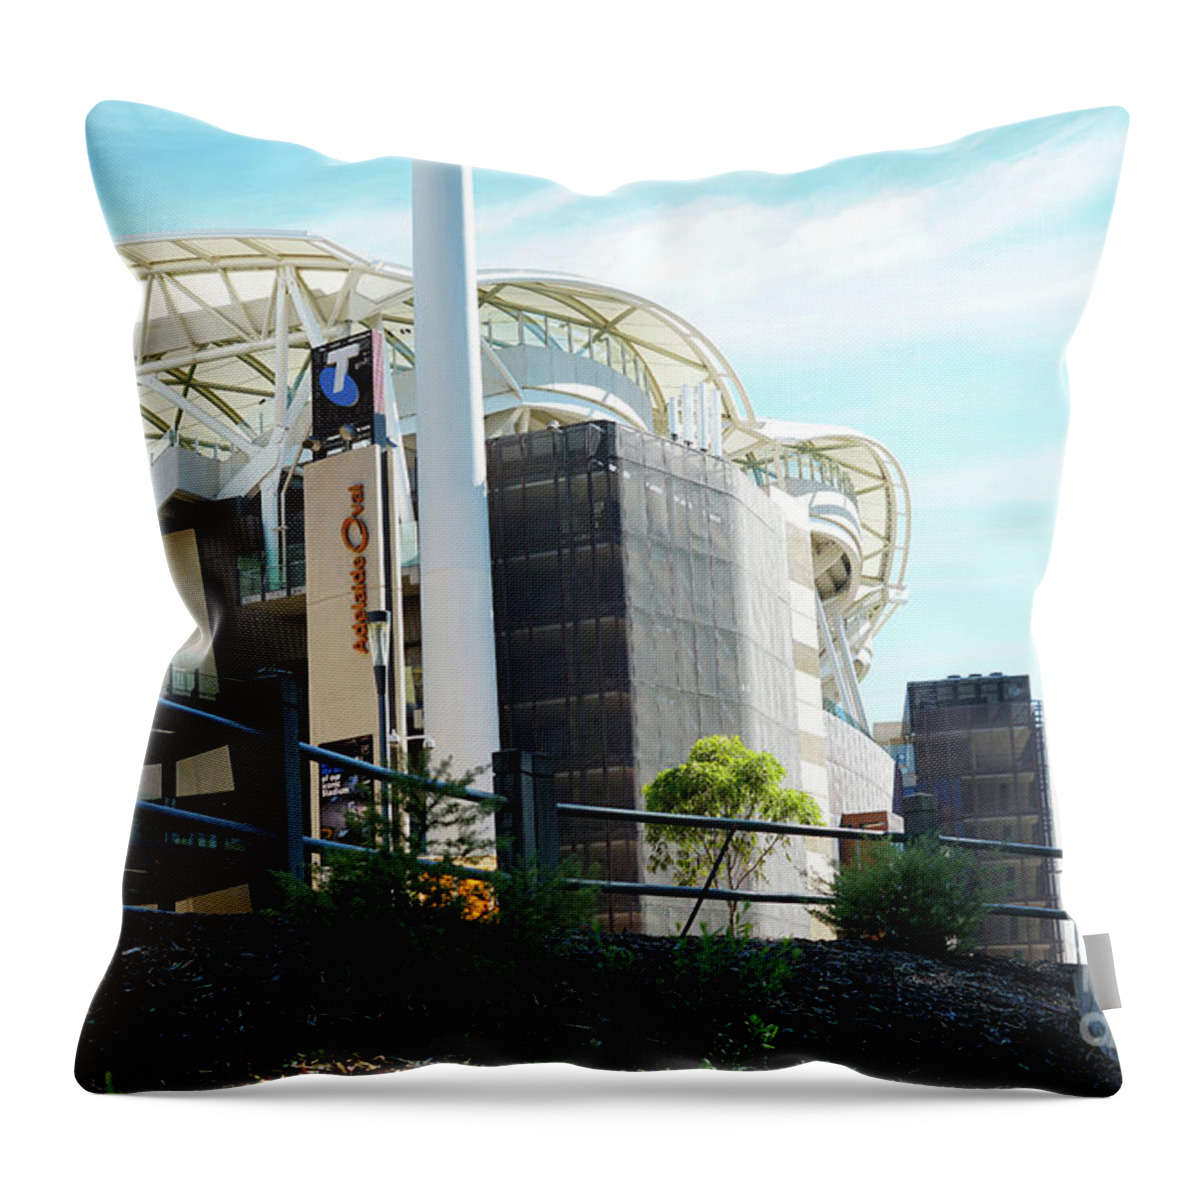 Adelaide Throw Pillow featuring the photograph Adelaide Oval Stadium, South Australia. by Milleflore Images